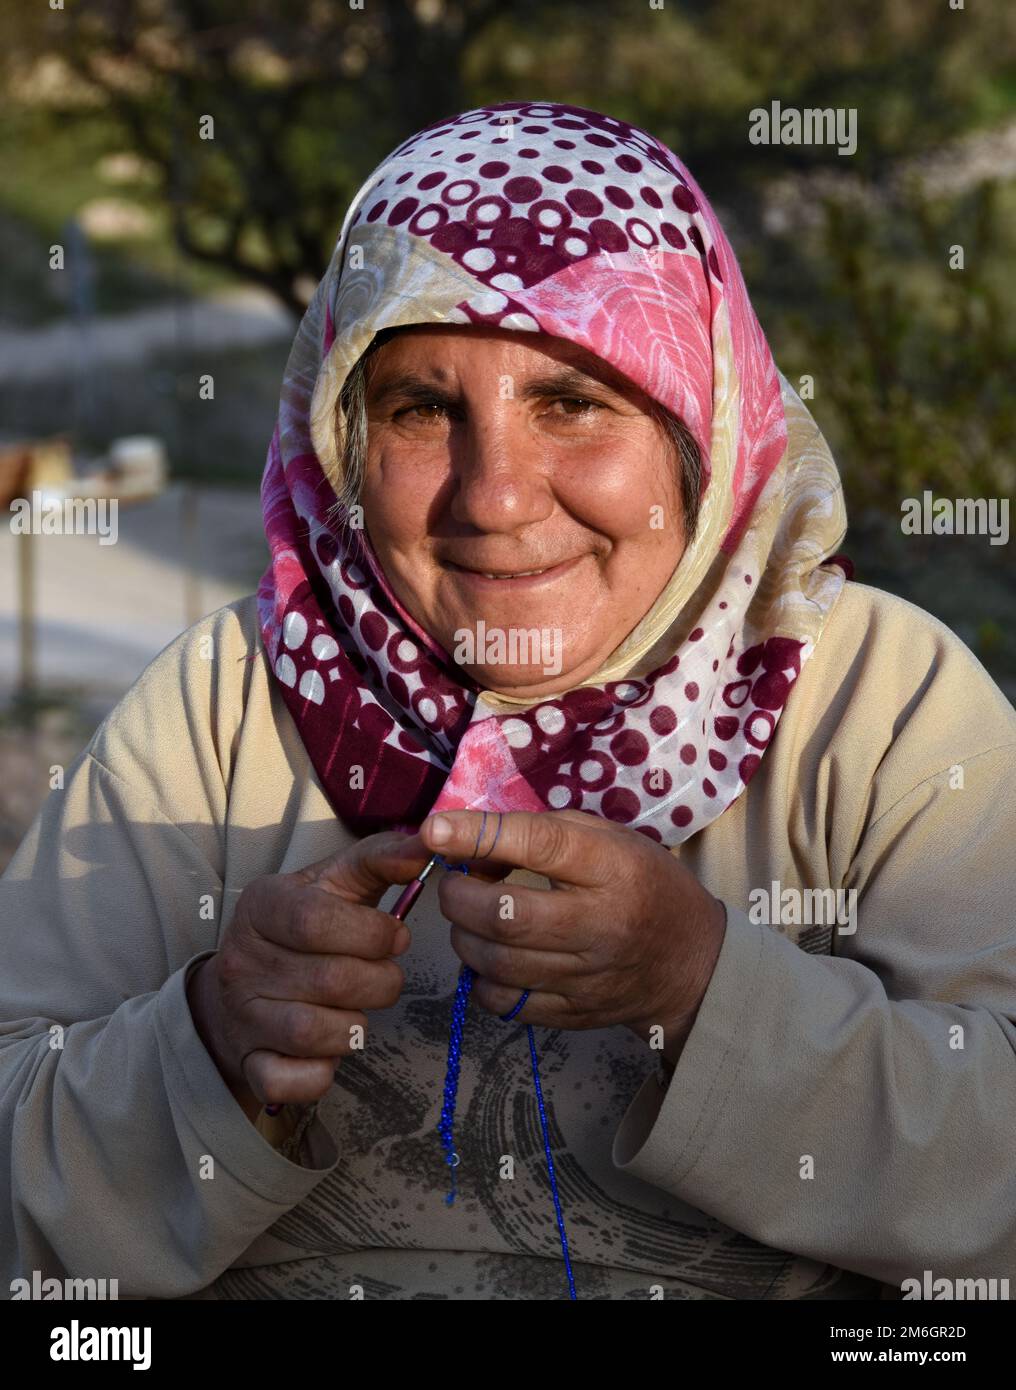 Faces of Turkey: Mature Women in Traditional Head Scarf Stock Photo